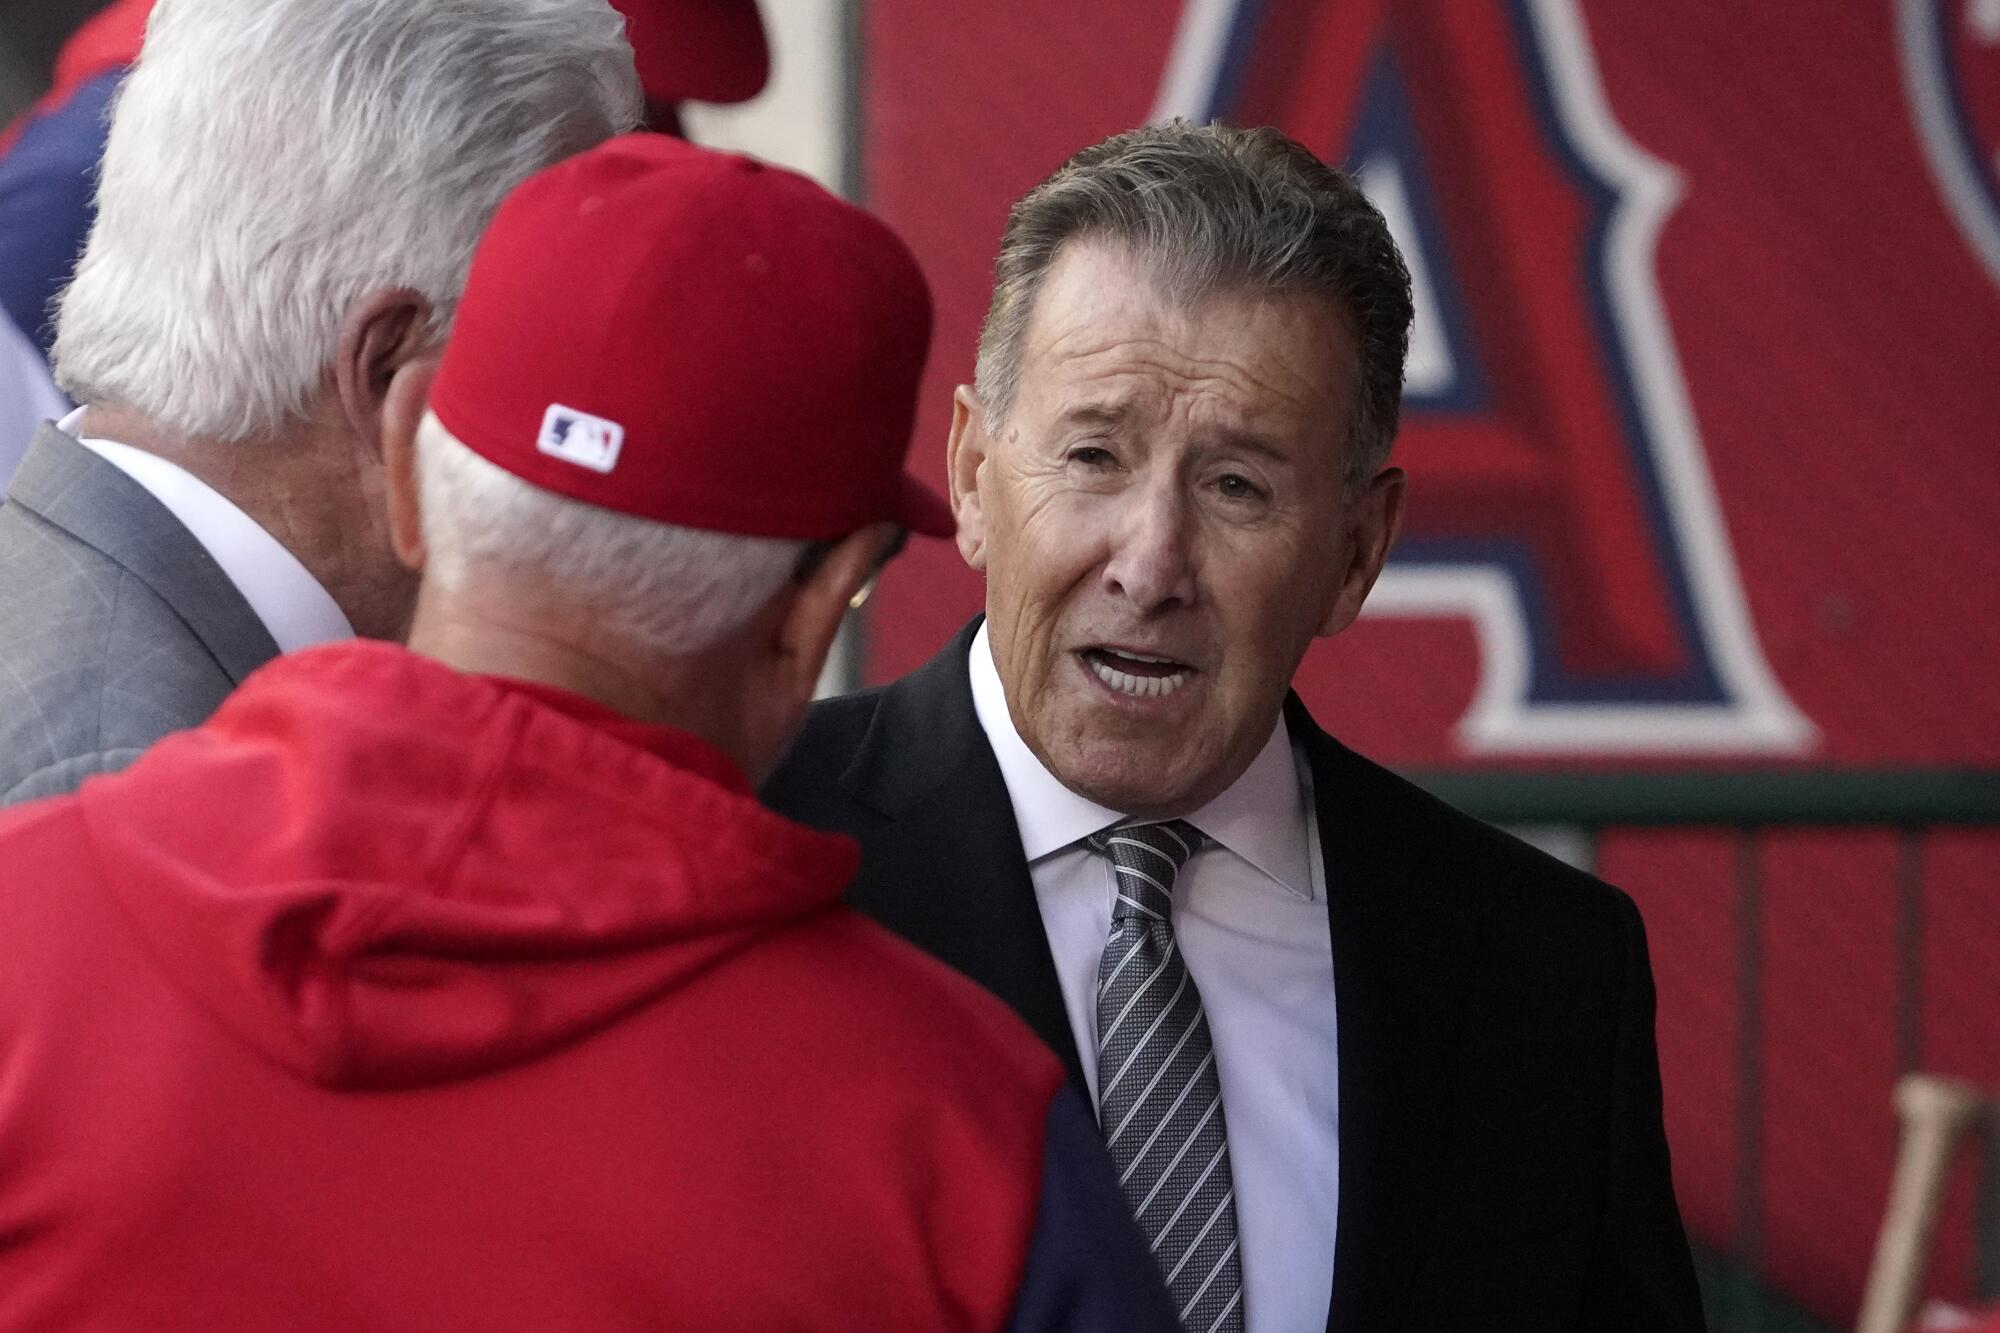 Angels owner Arte Moreno, right, talks with manager Joe Maddon before a game against Cleveland on April 26, 2022.